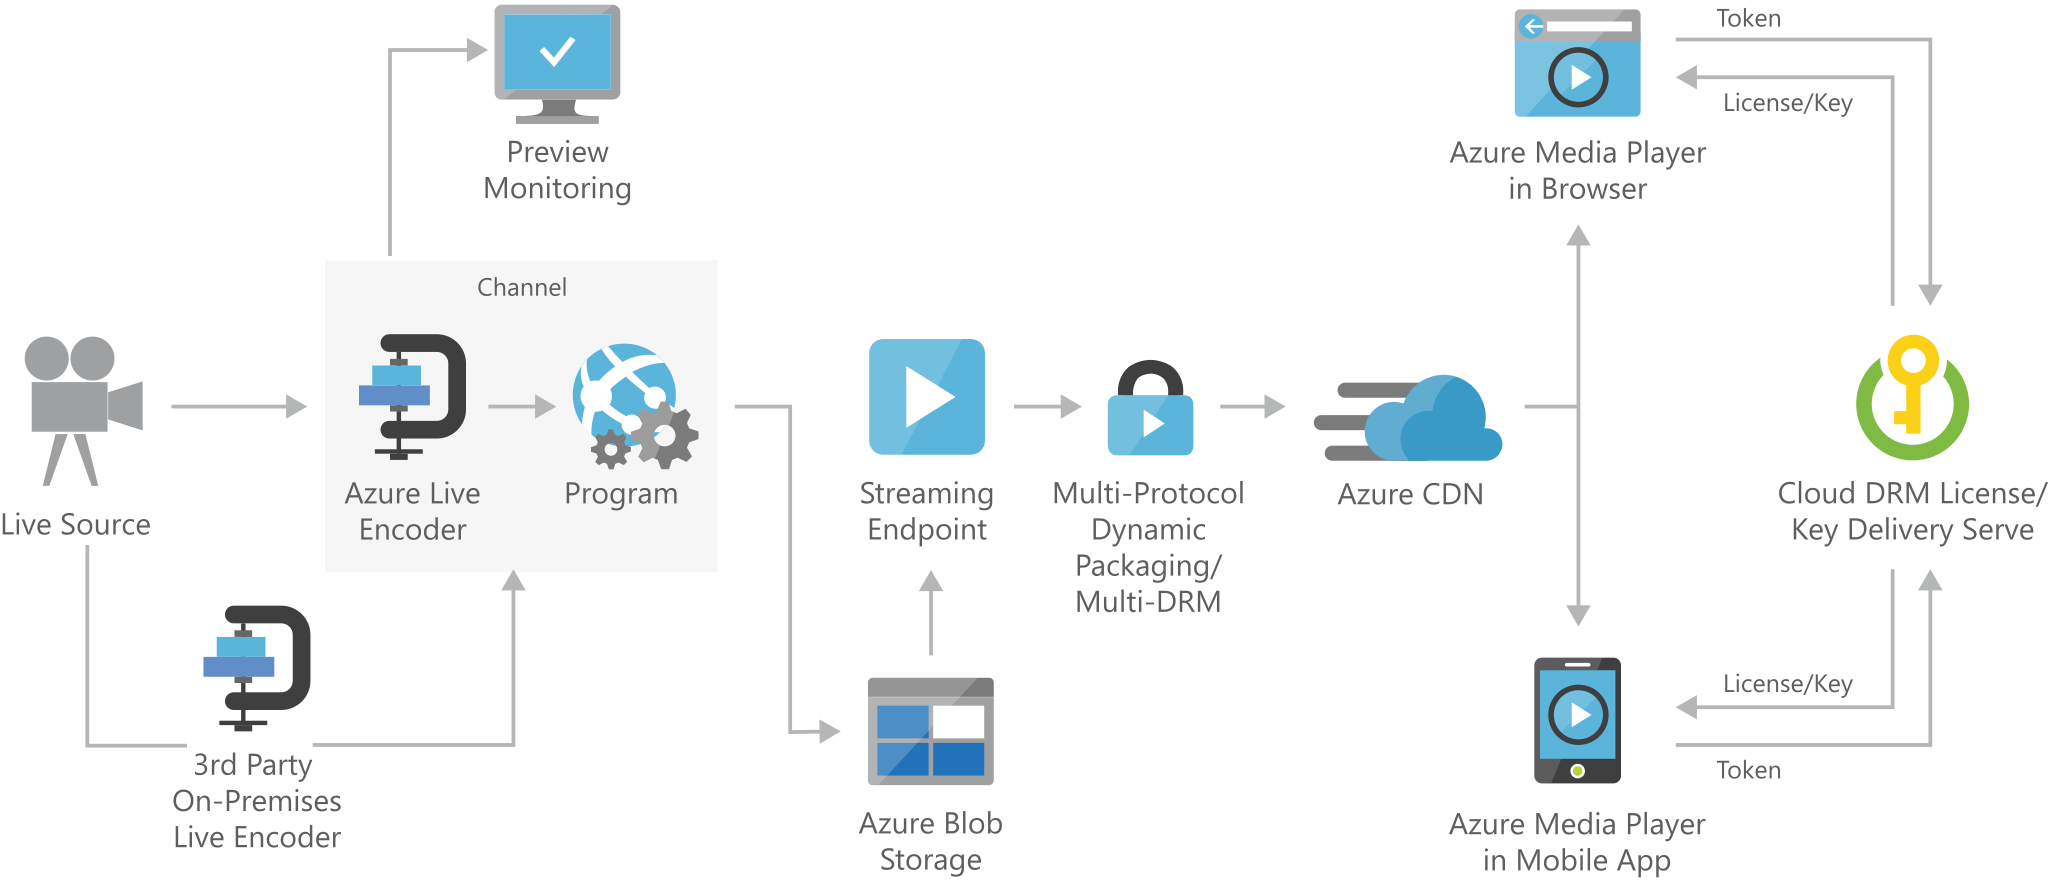 Architecture diagram shows the flow from the live source through Azure live encoder to the streaming endpoint.